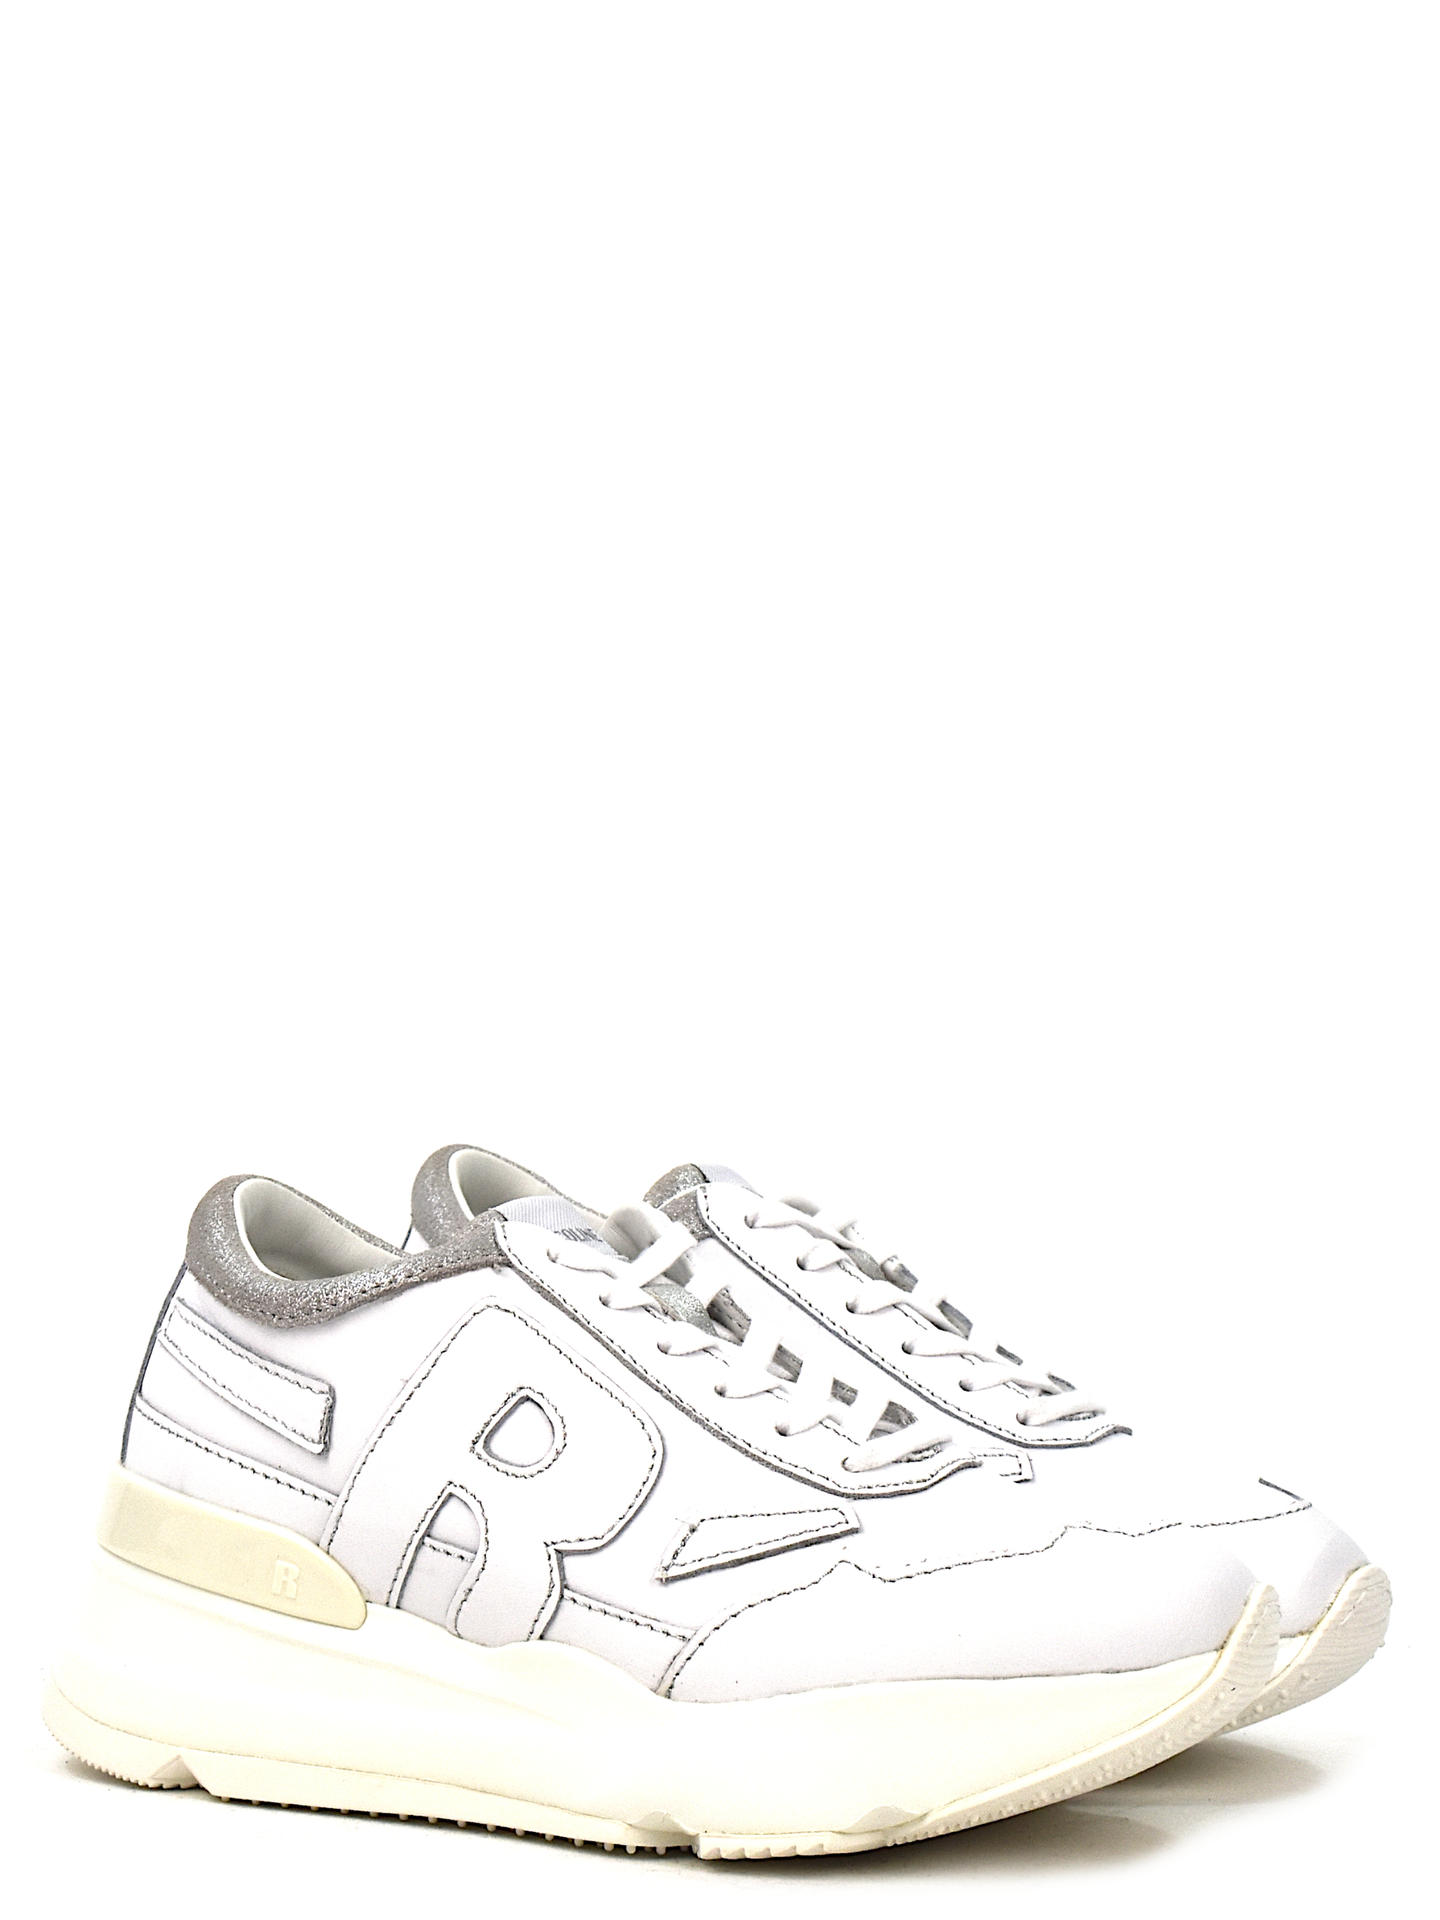 SNEAKERS RUCOLINE REVOLLEP BIANCO/ARGENTO